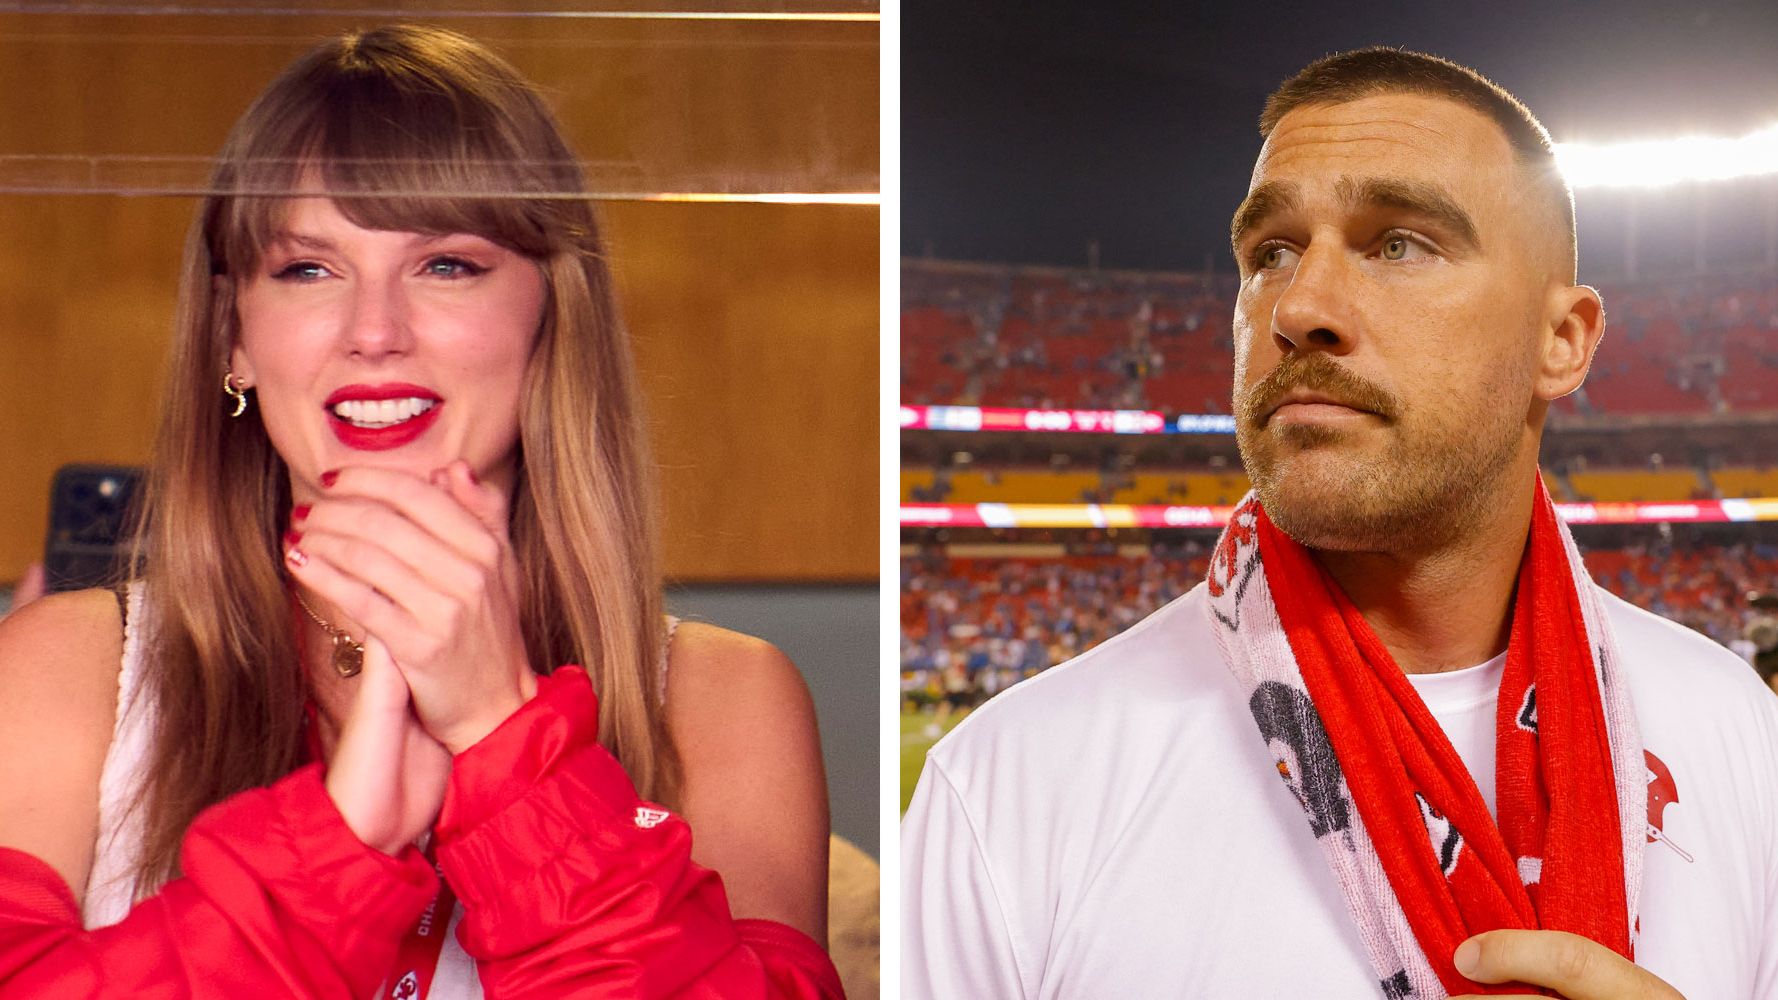 "AM giving of all of this, to kelce.  After the super bowl. "Taylor Swift   show of gift  items she wants to give to kelce